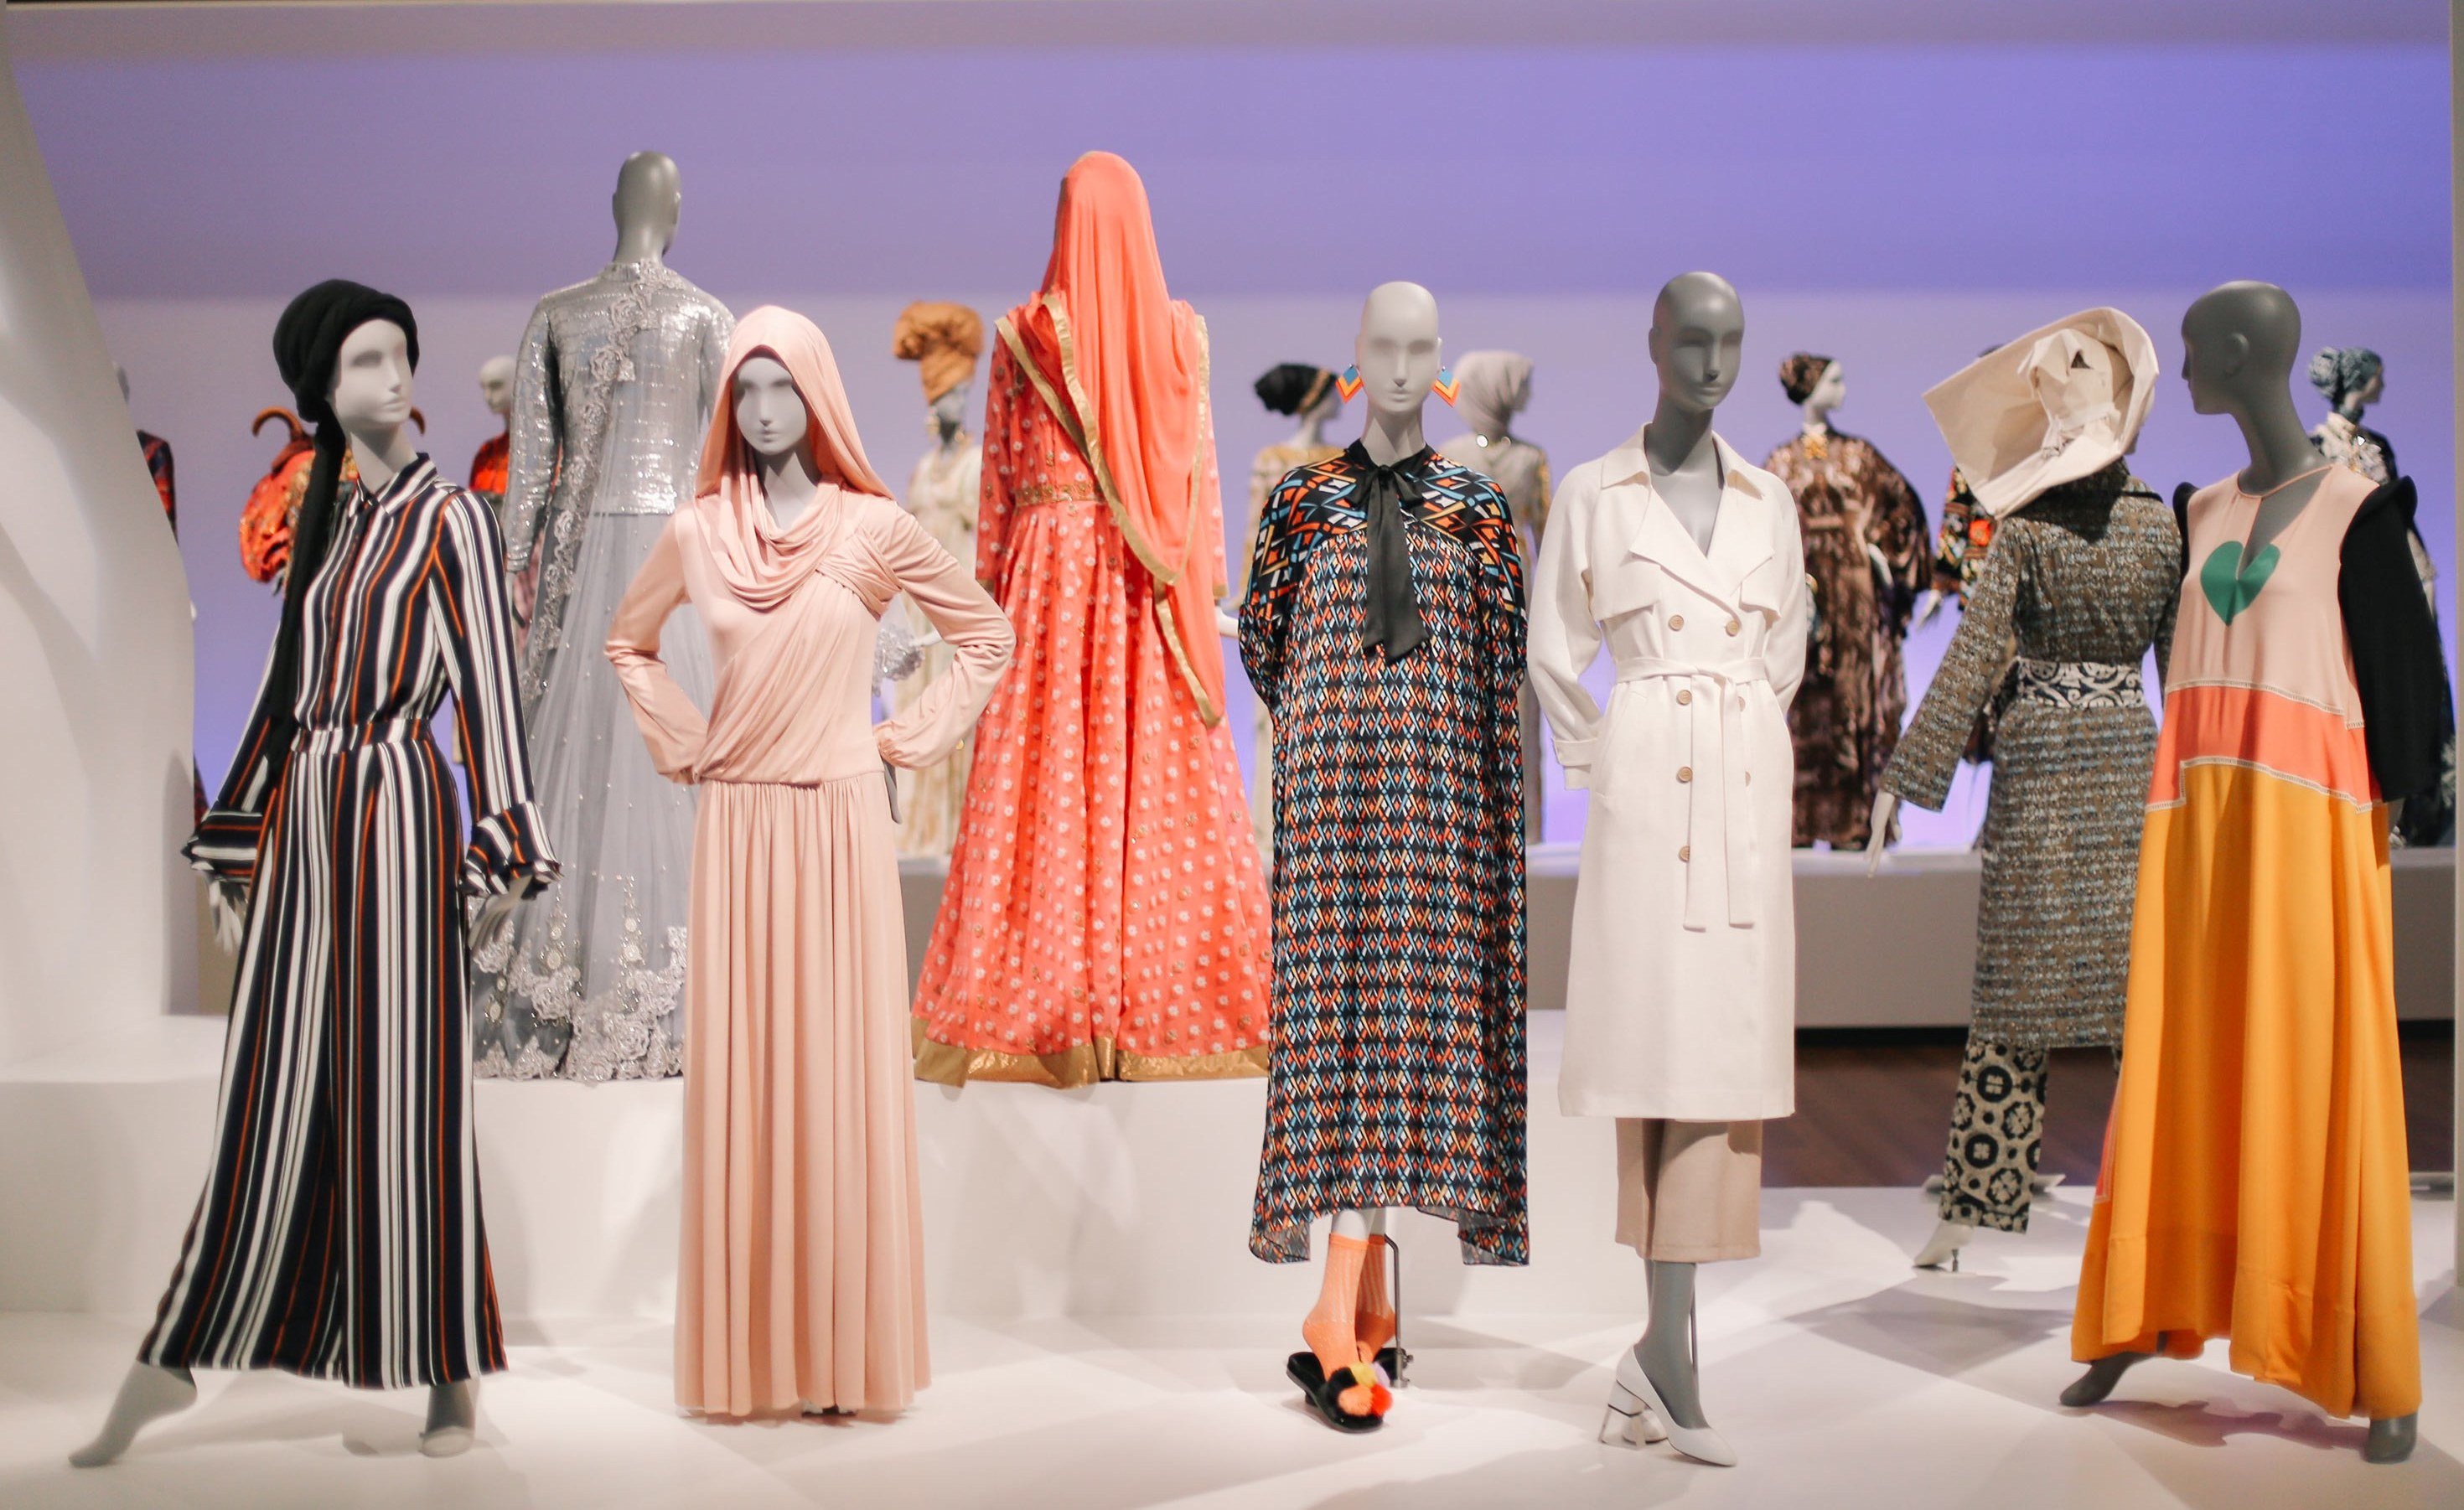 A view of the “Contemporary Muslim Fashions” exhibit 